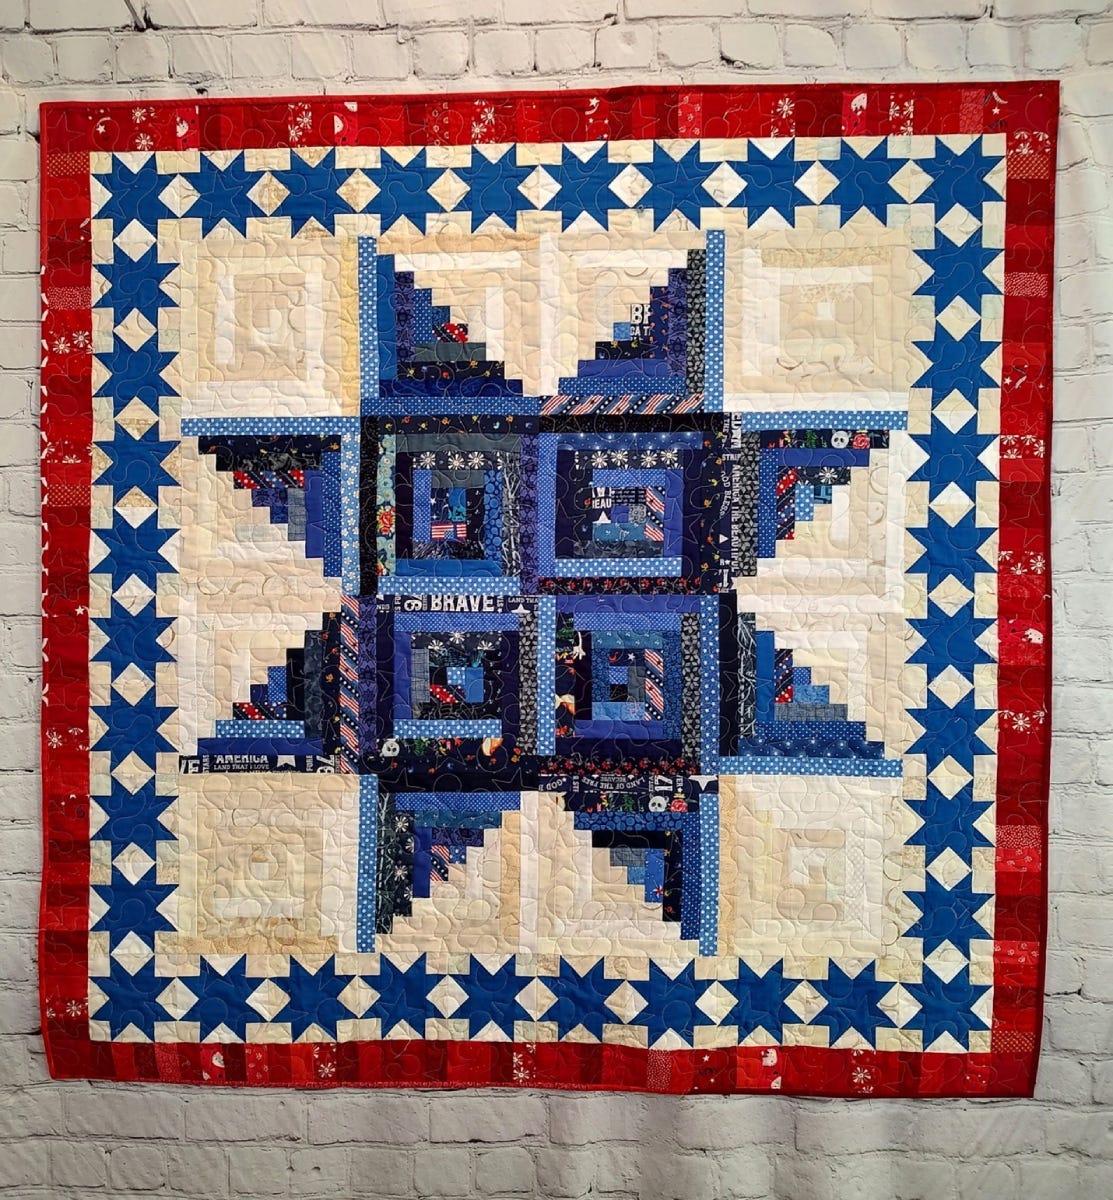 Finished Scrappy Patriotic Log Cabin Star Quilt